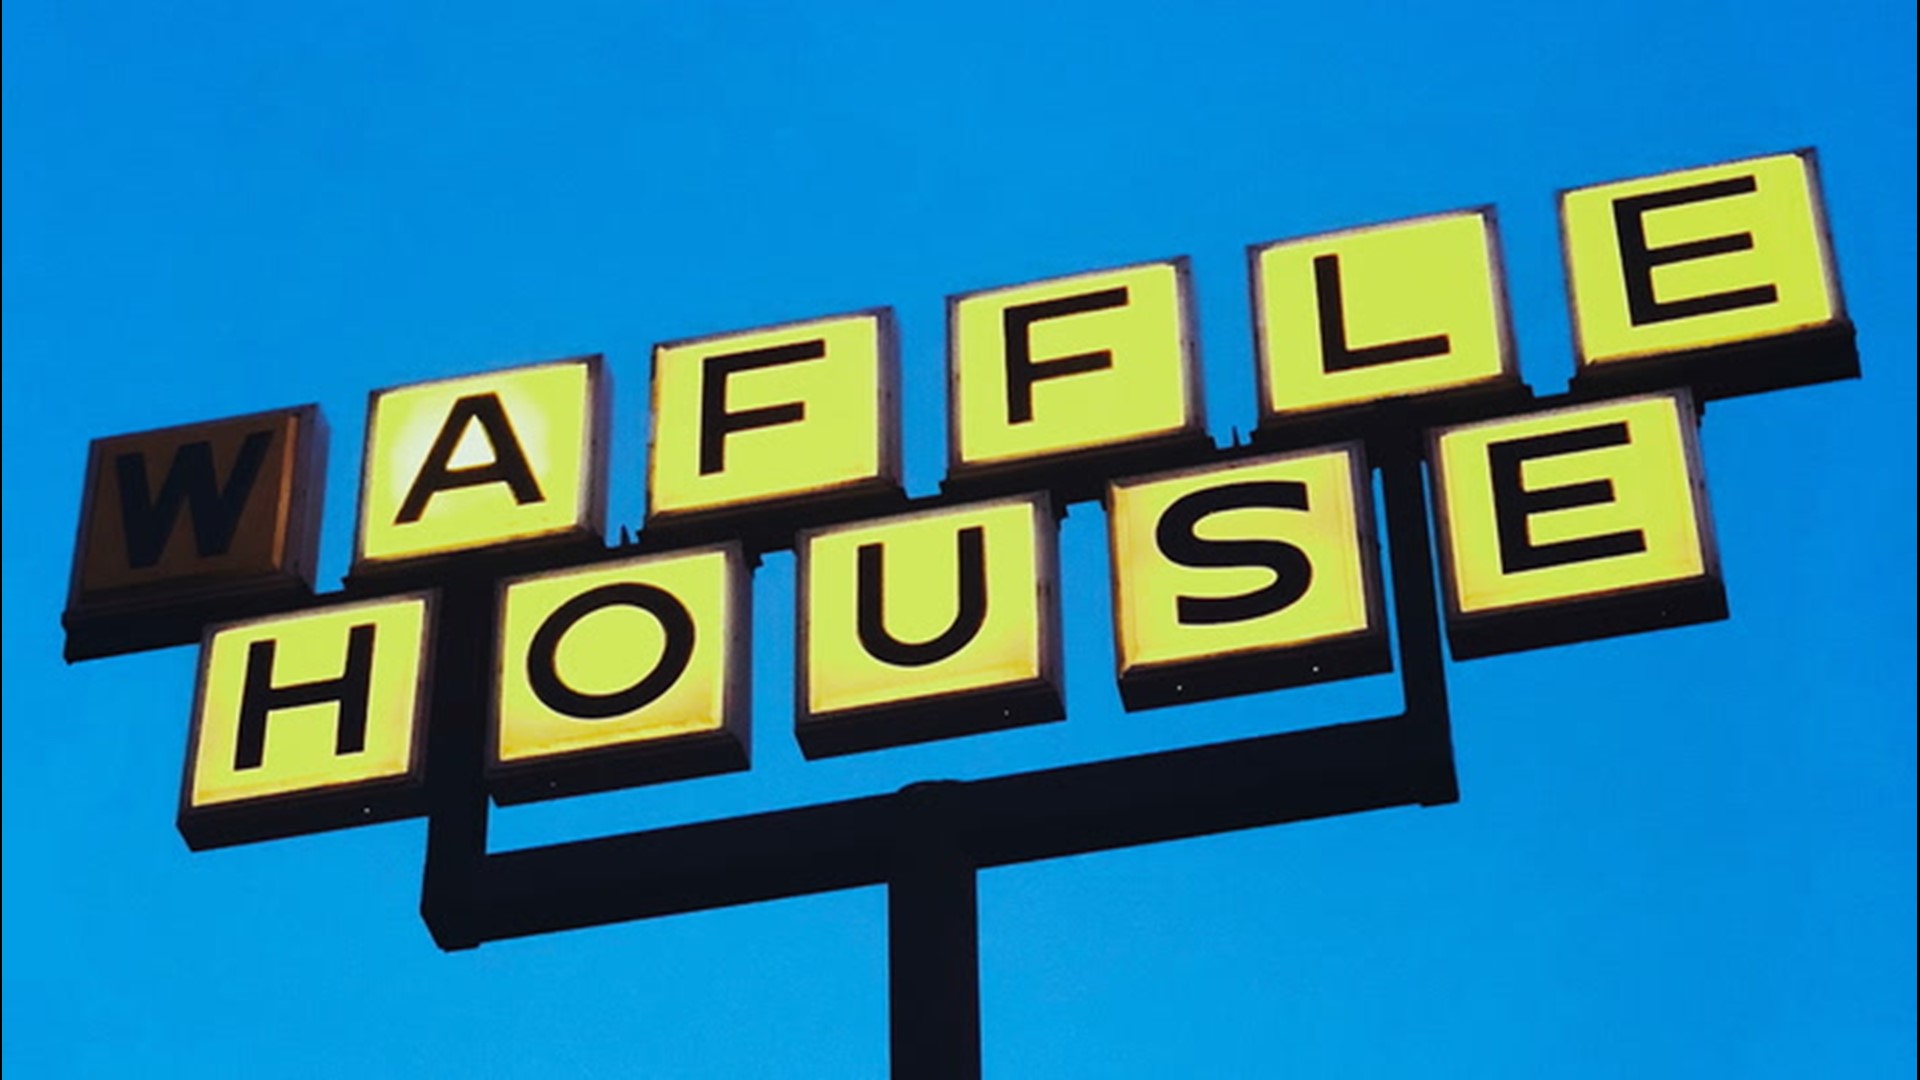 If the Waffle House is closed, you know it's serious. The restaurant, famous for staying open even during hurricanes, has announced closures due to the coronavirus pandemic.